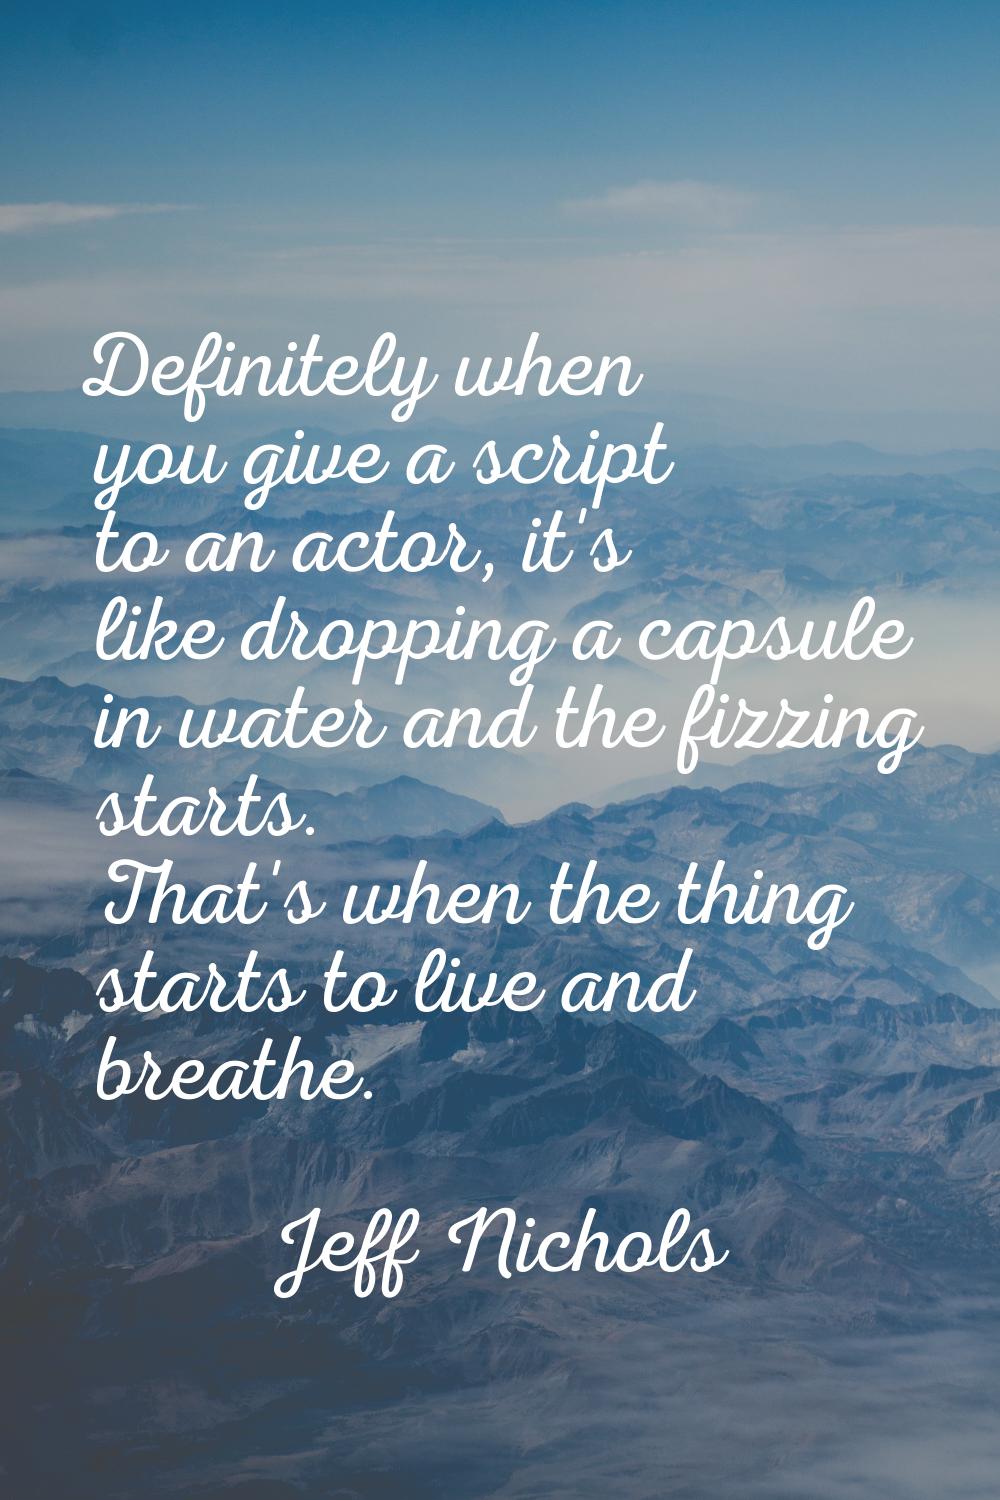 Definitely when you give a script to an actor, it's like dropping a capsule in water and the fizzin